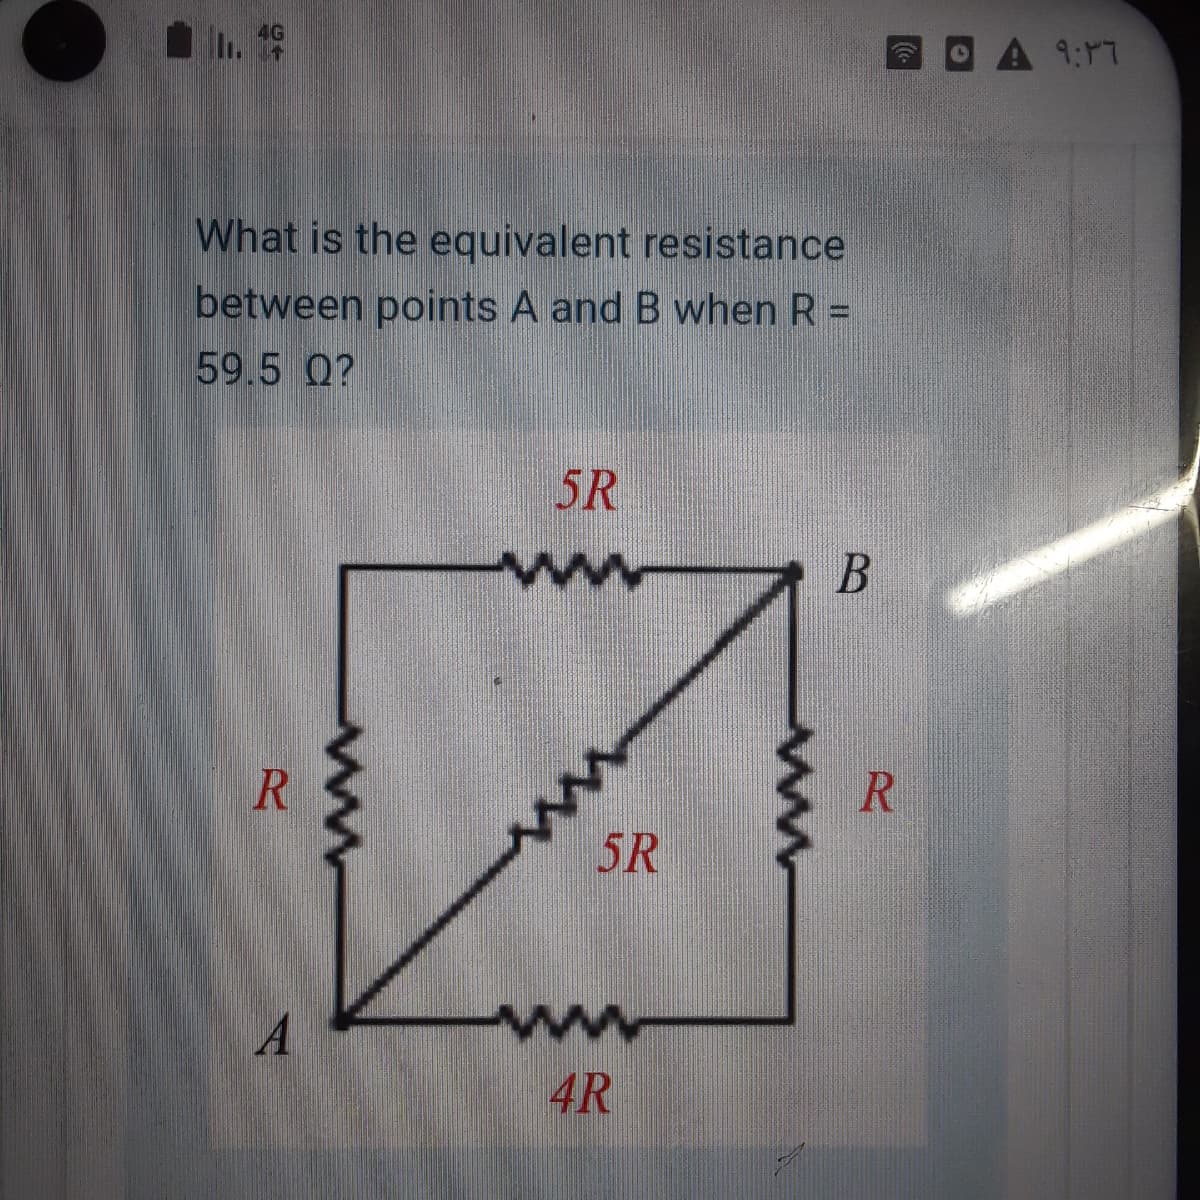 AOA 117
What is the equivalent resistance
between points A and B when R =
59.5 0?
5R
R
R
5R
4R
